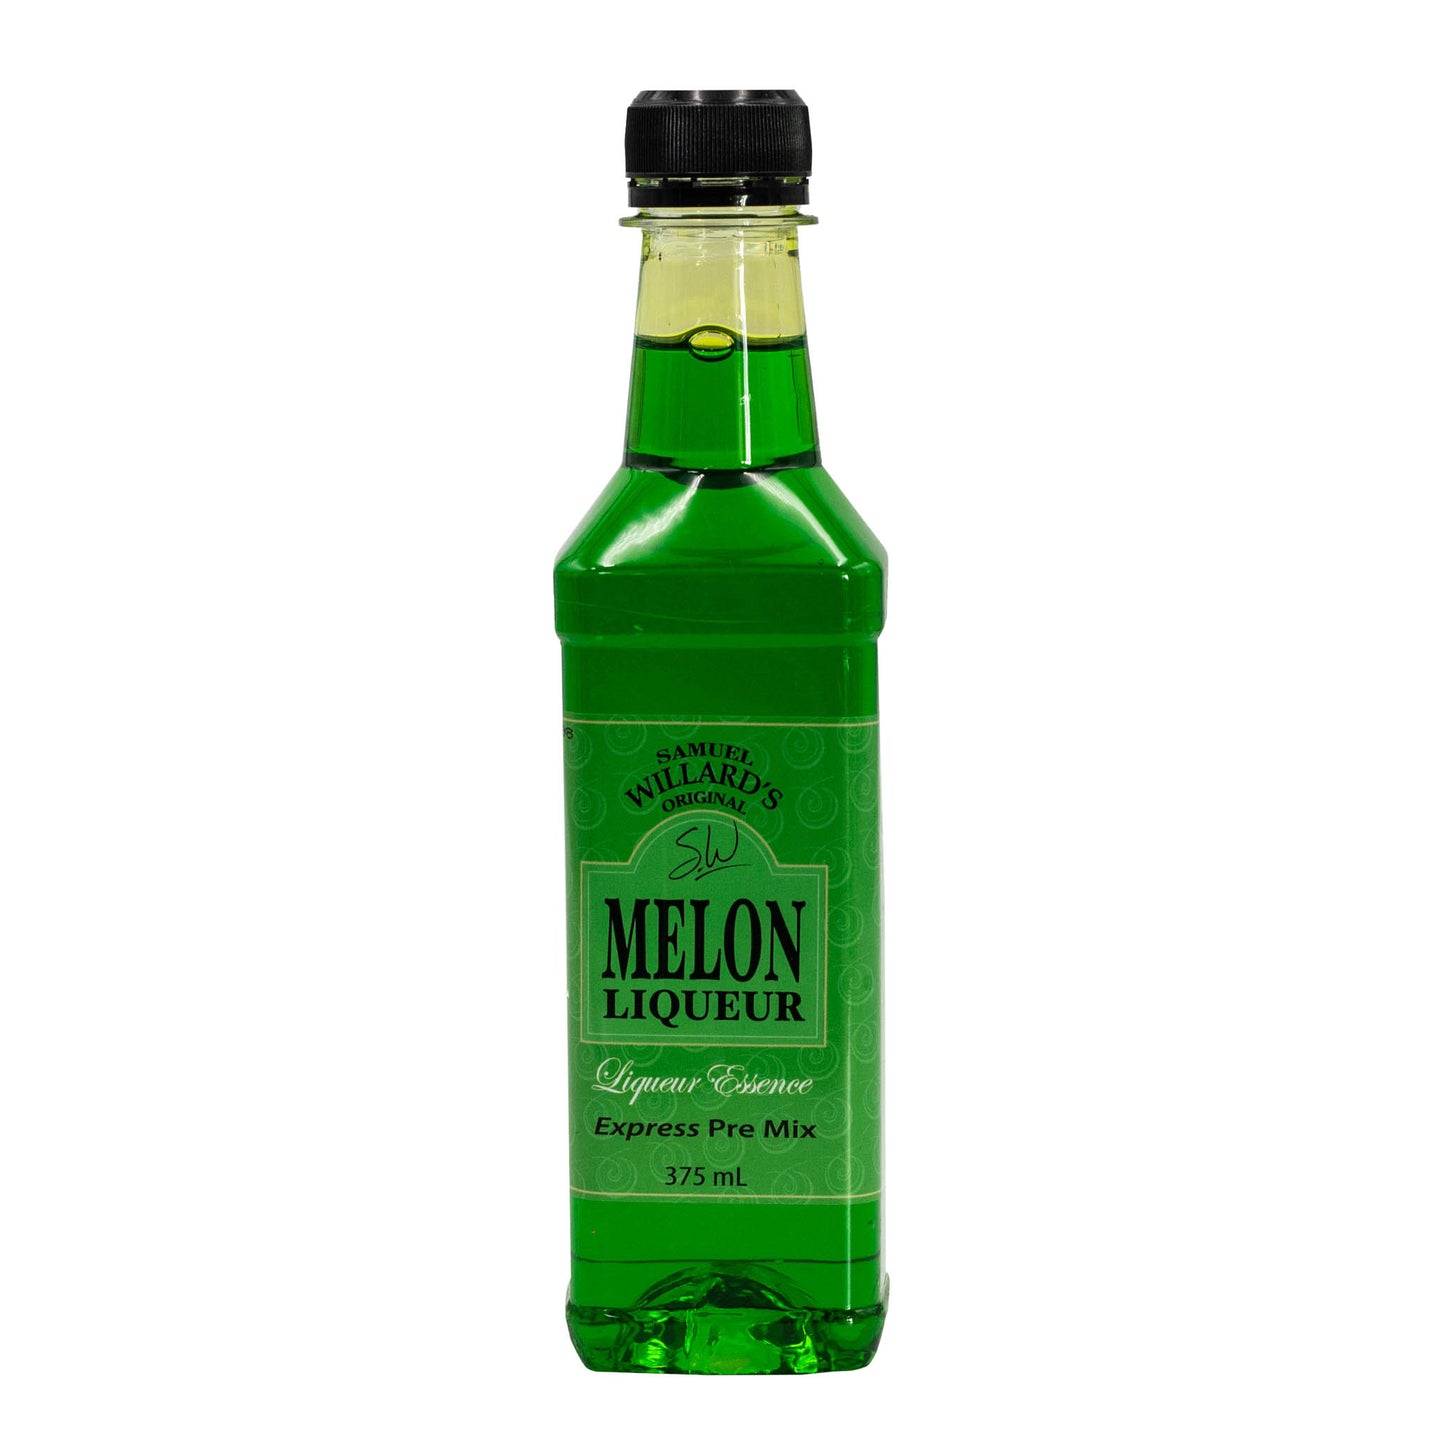 Samuel Willards Melon liqueur premix makes a Medori style drink. Will make 1125ml of finished product from each 375ml bottle